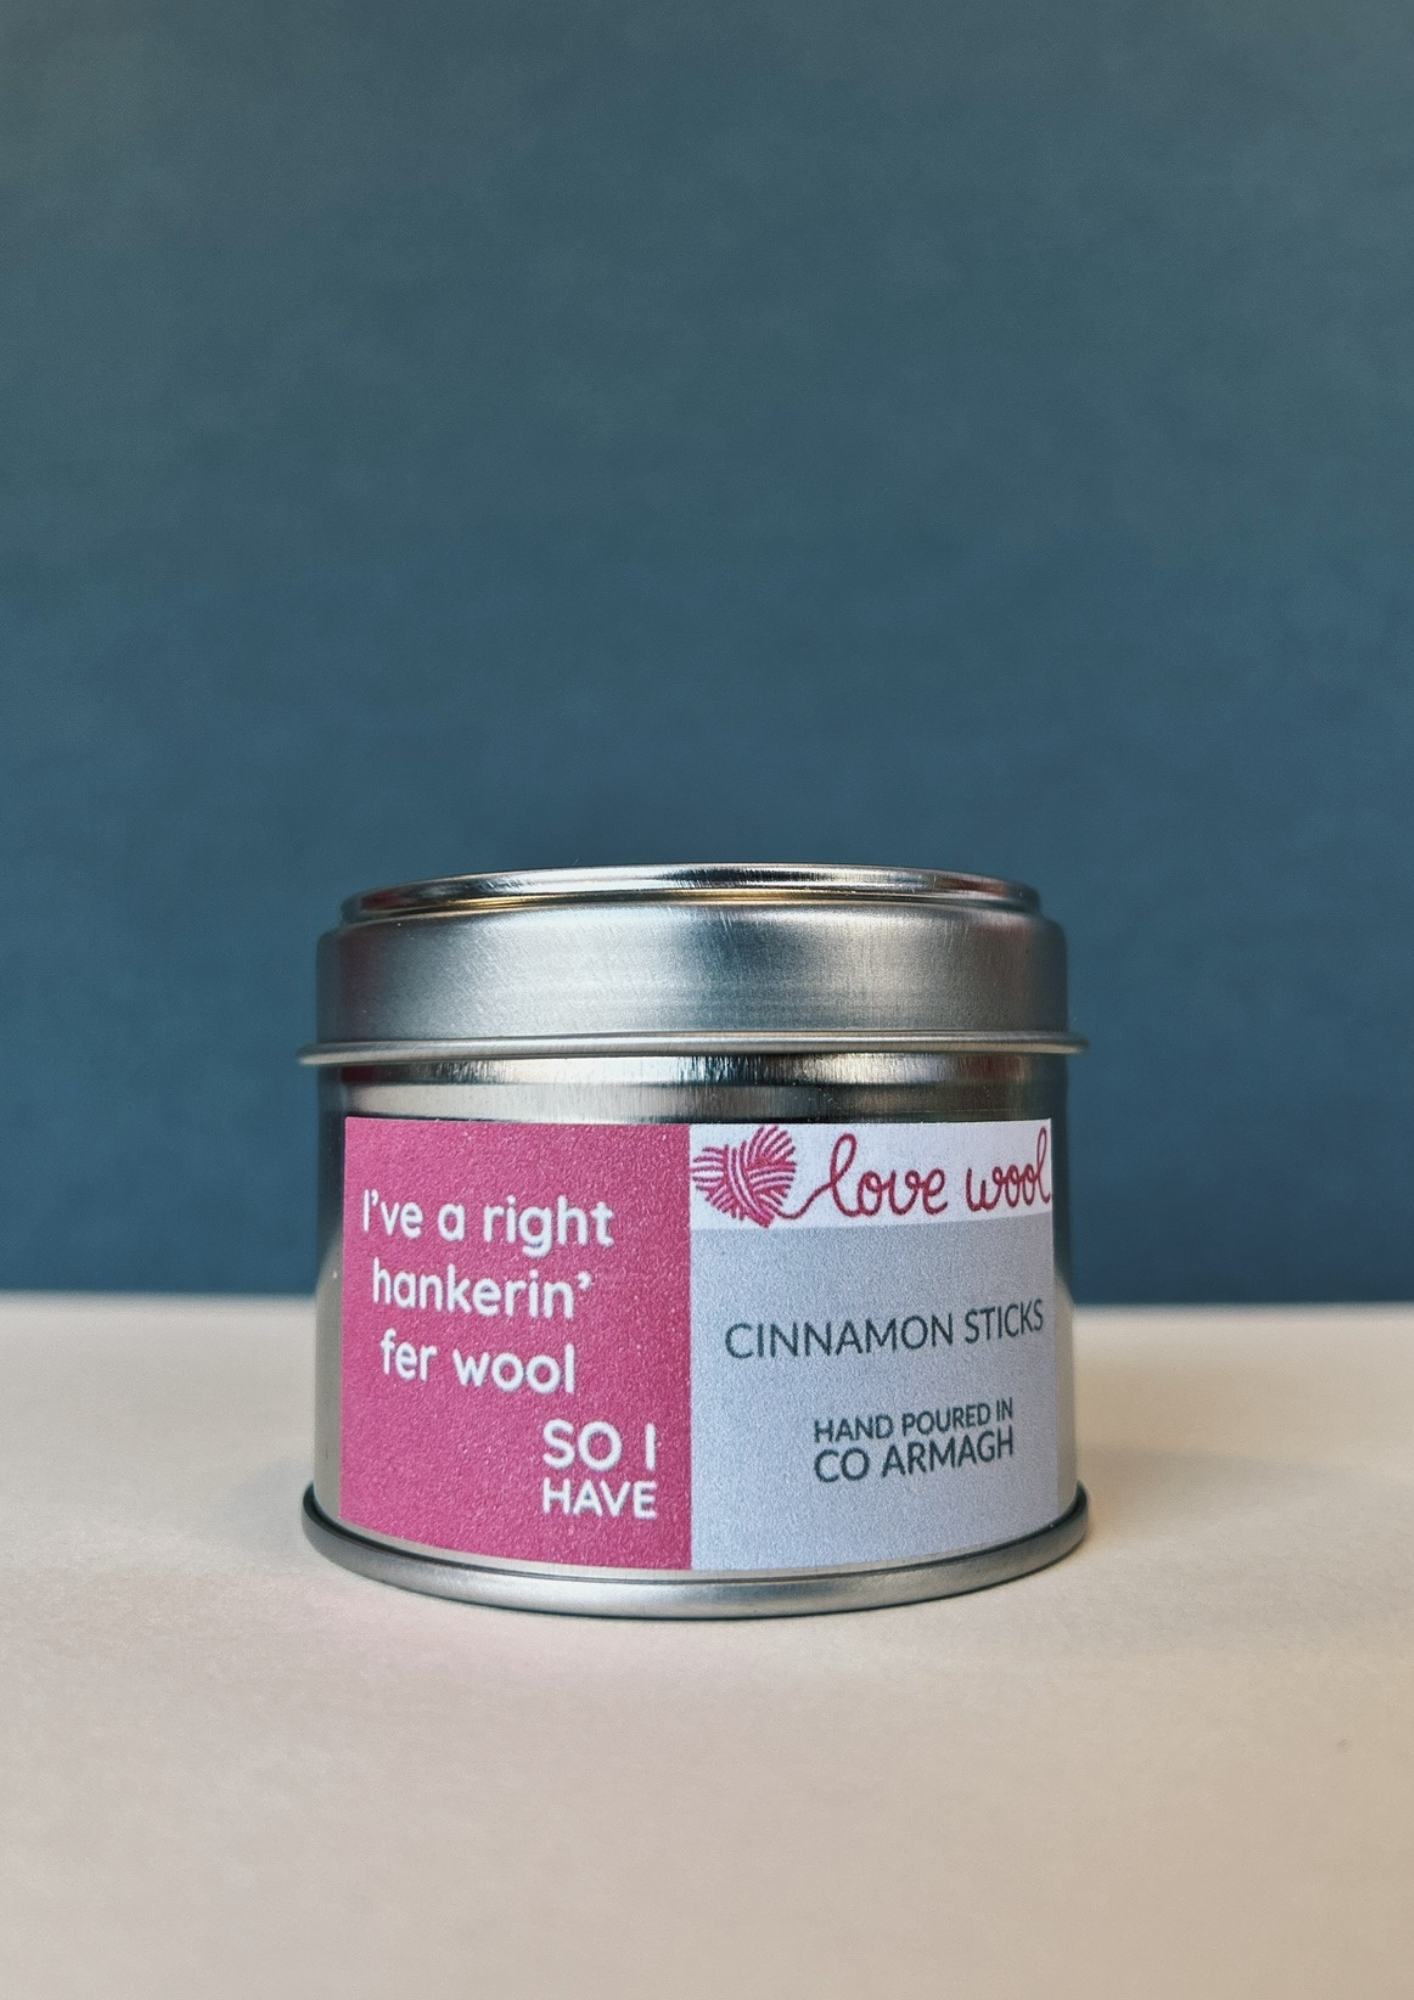 Love Wool Candle Tin - I've a right hankerin' fer wool product image